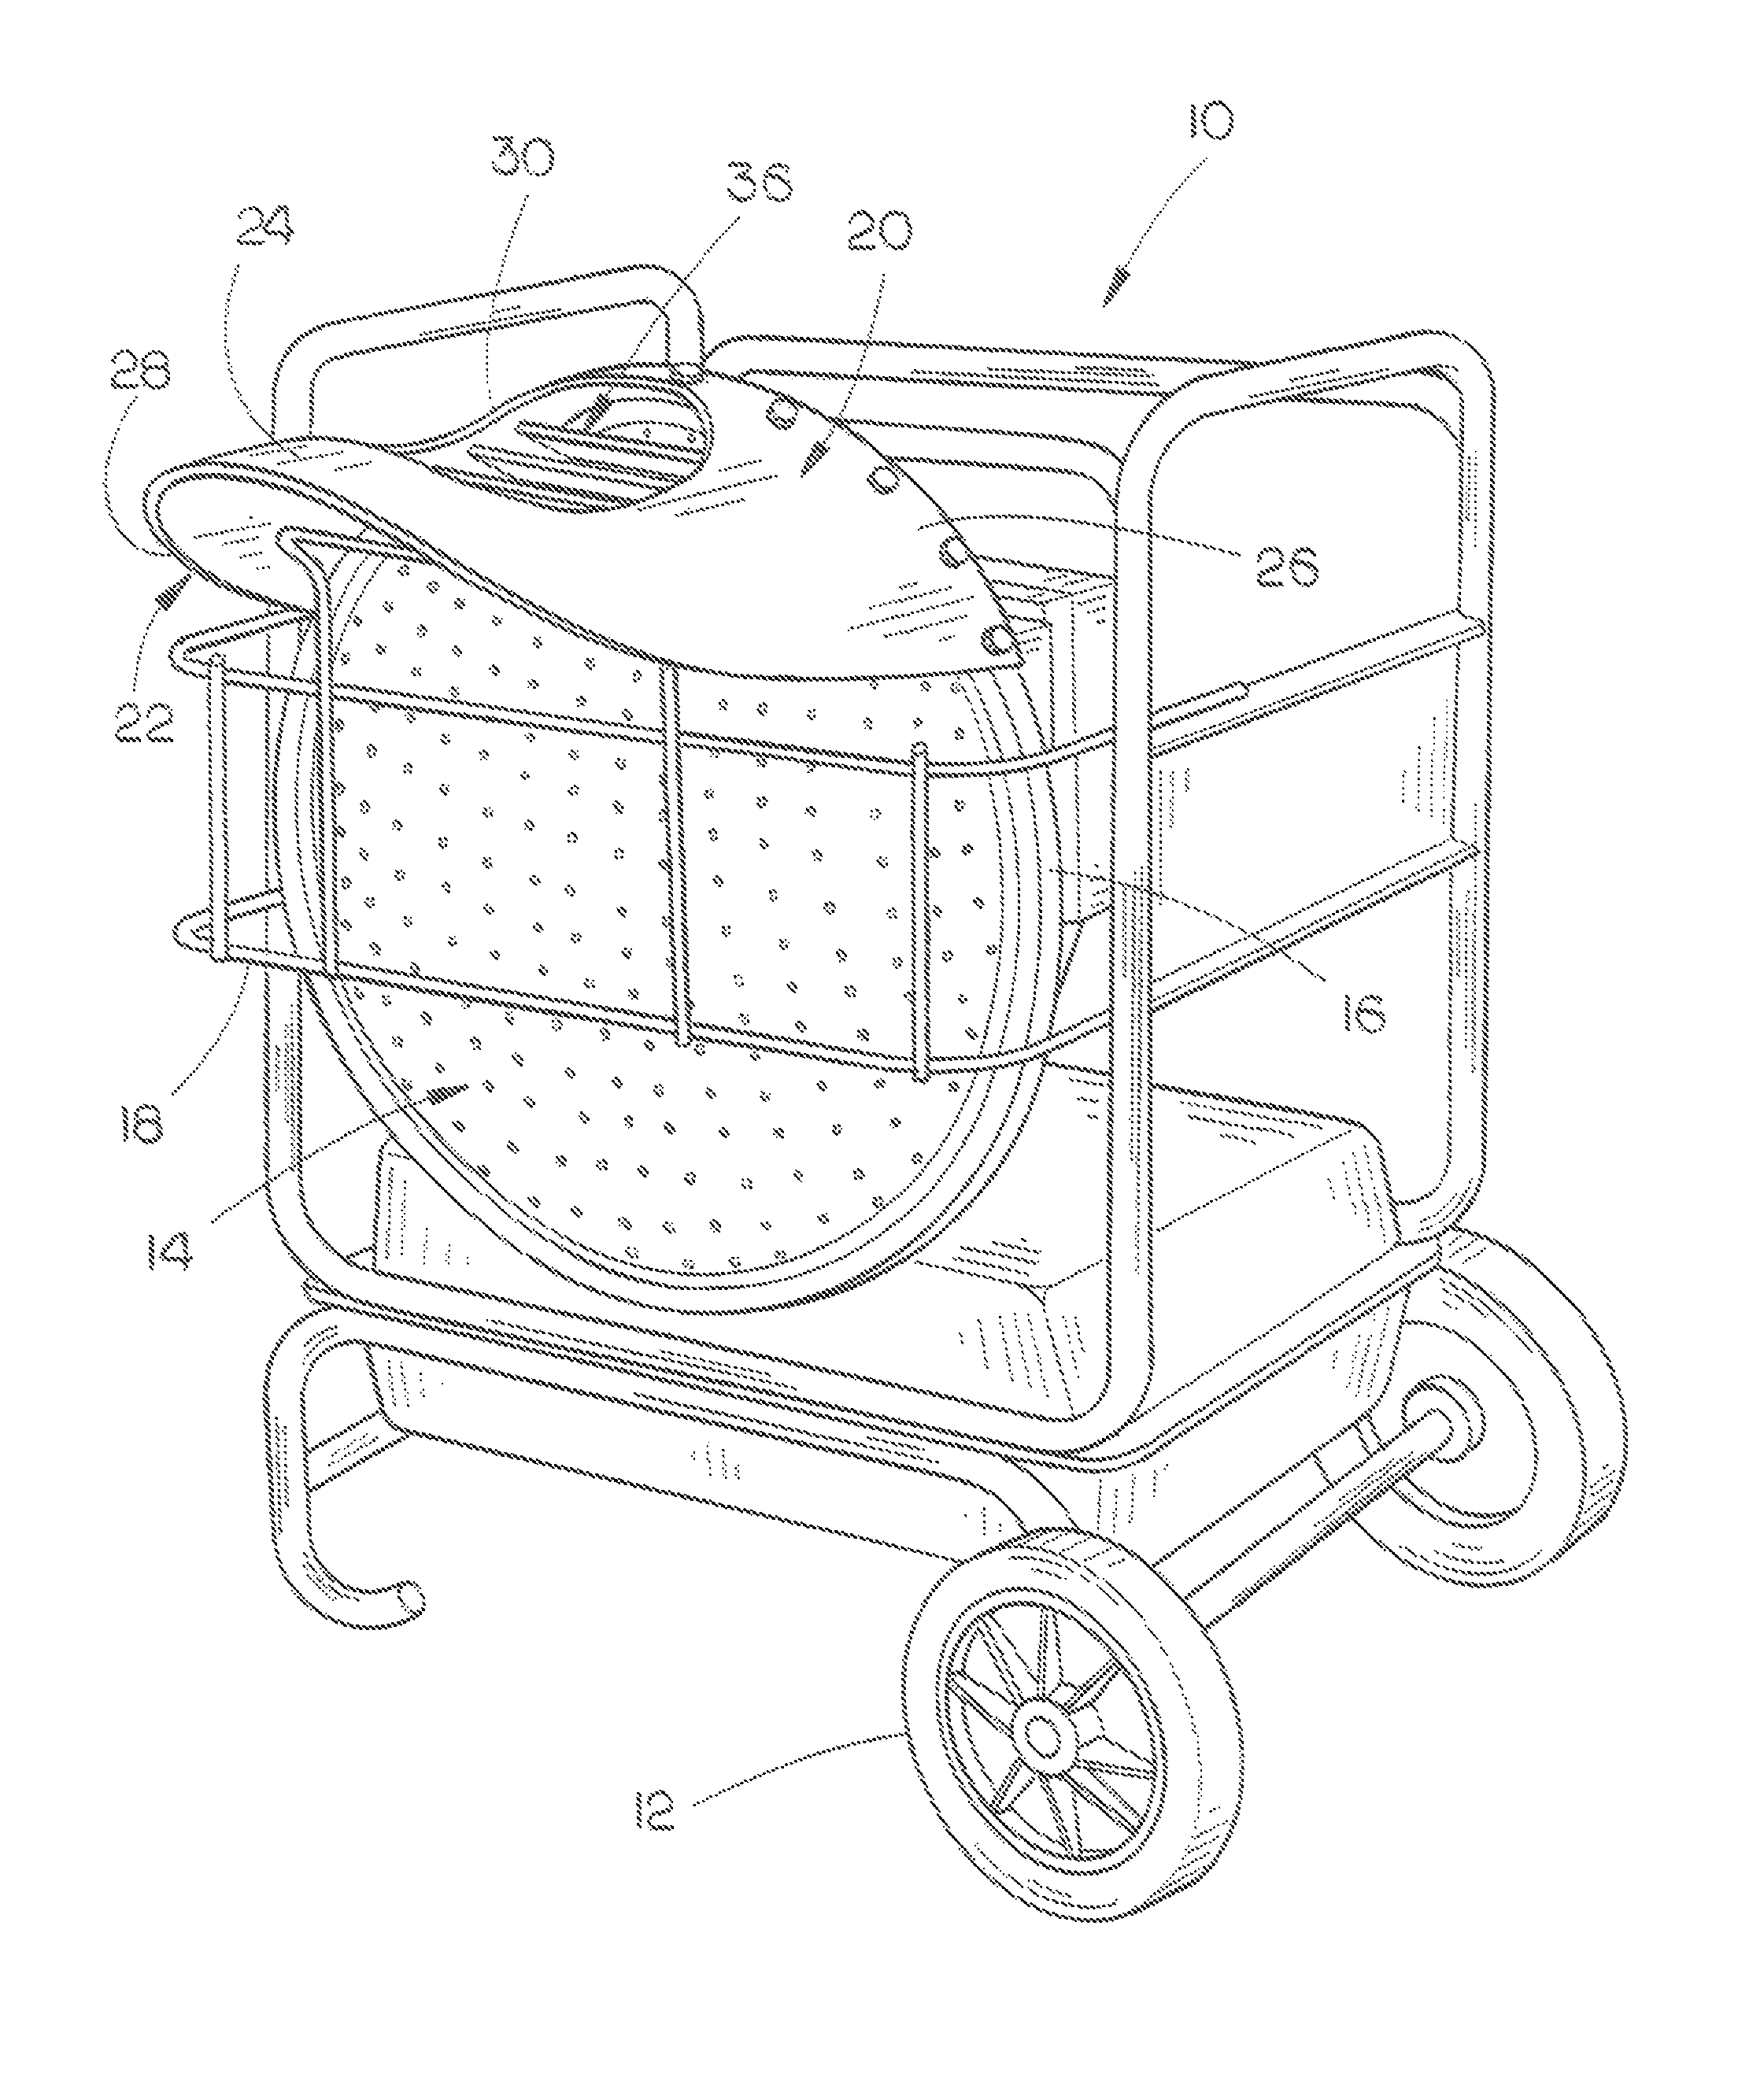 Apparatus for cooking or heating food or liquids